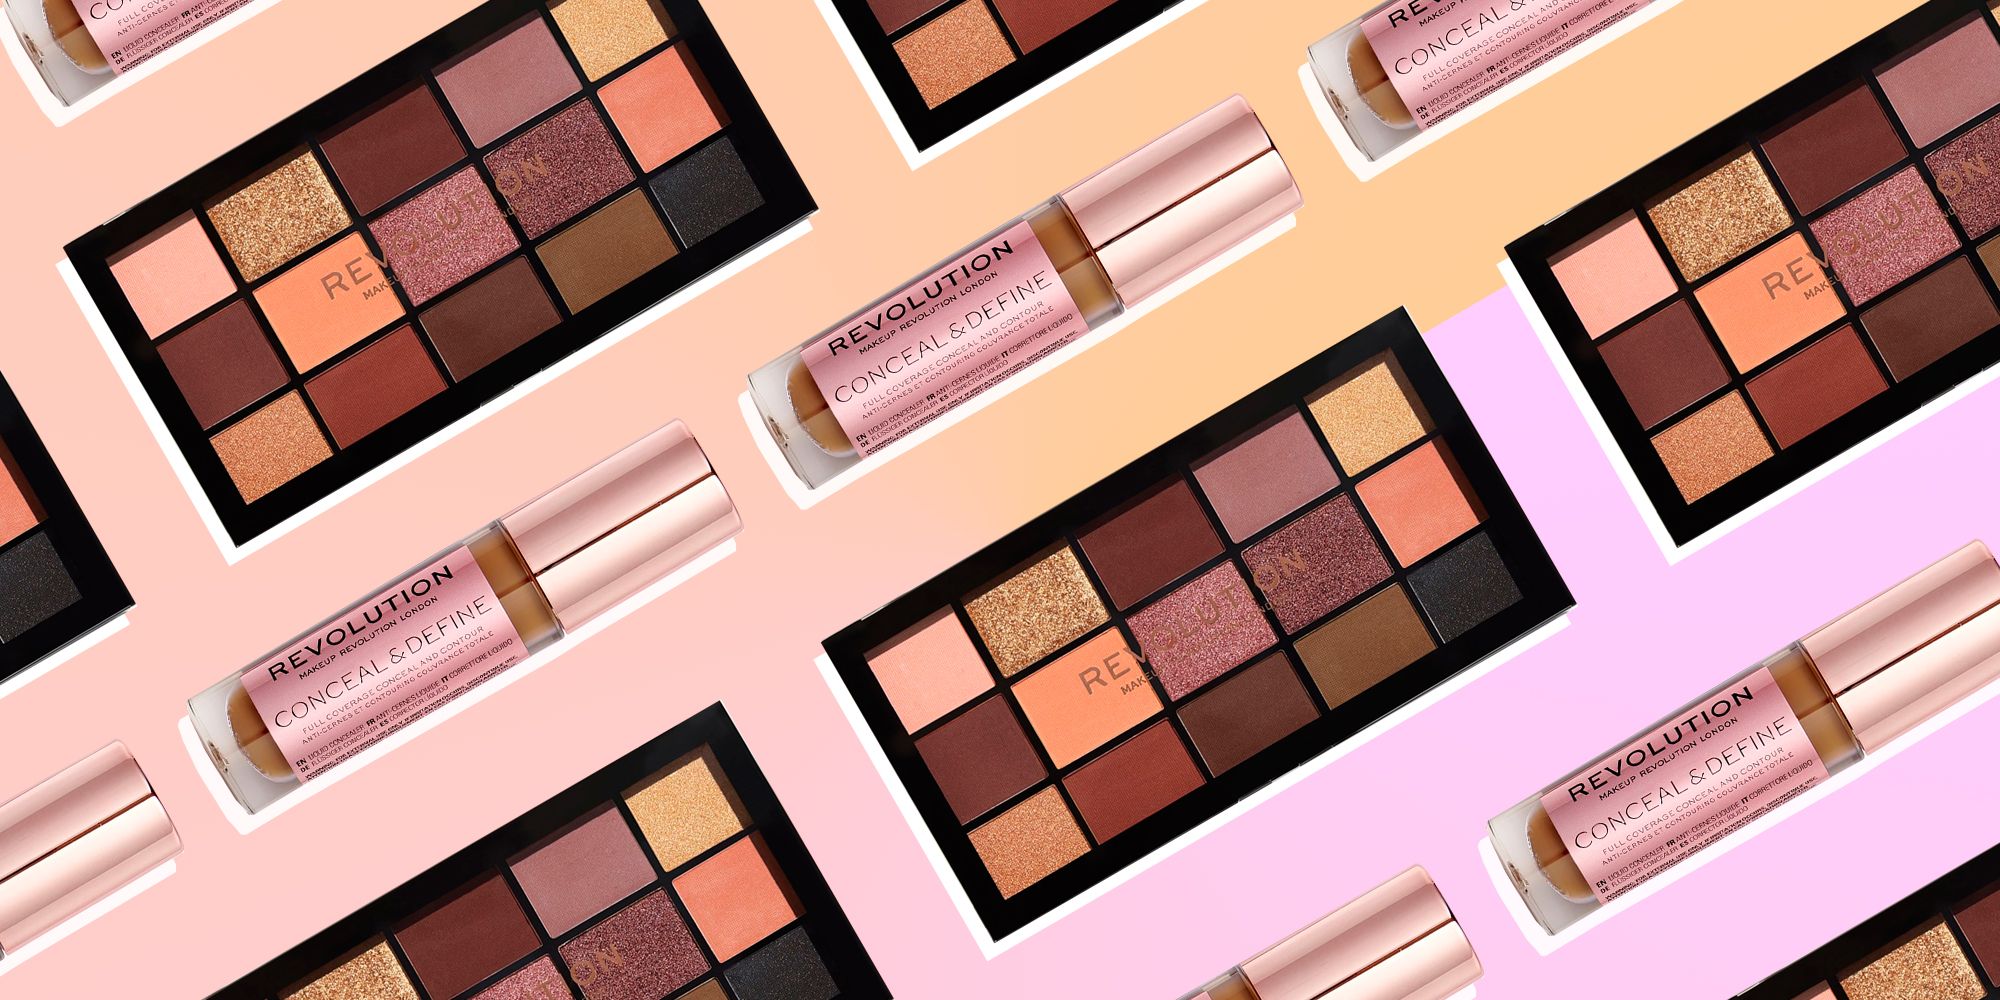 Makeup Revolution: 7 under £10 products that could totally pass high end